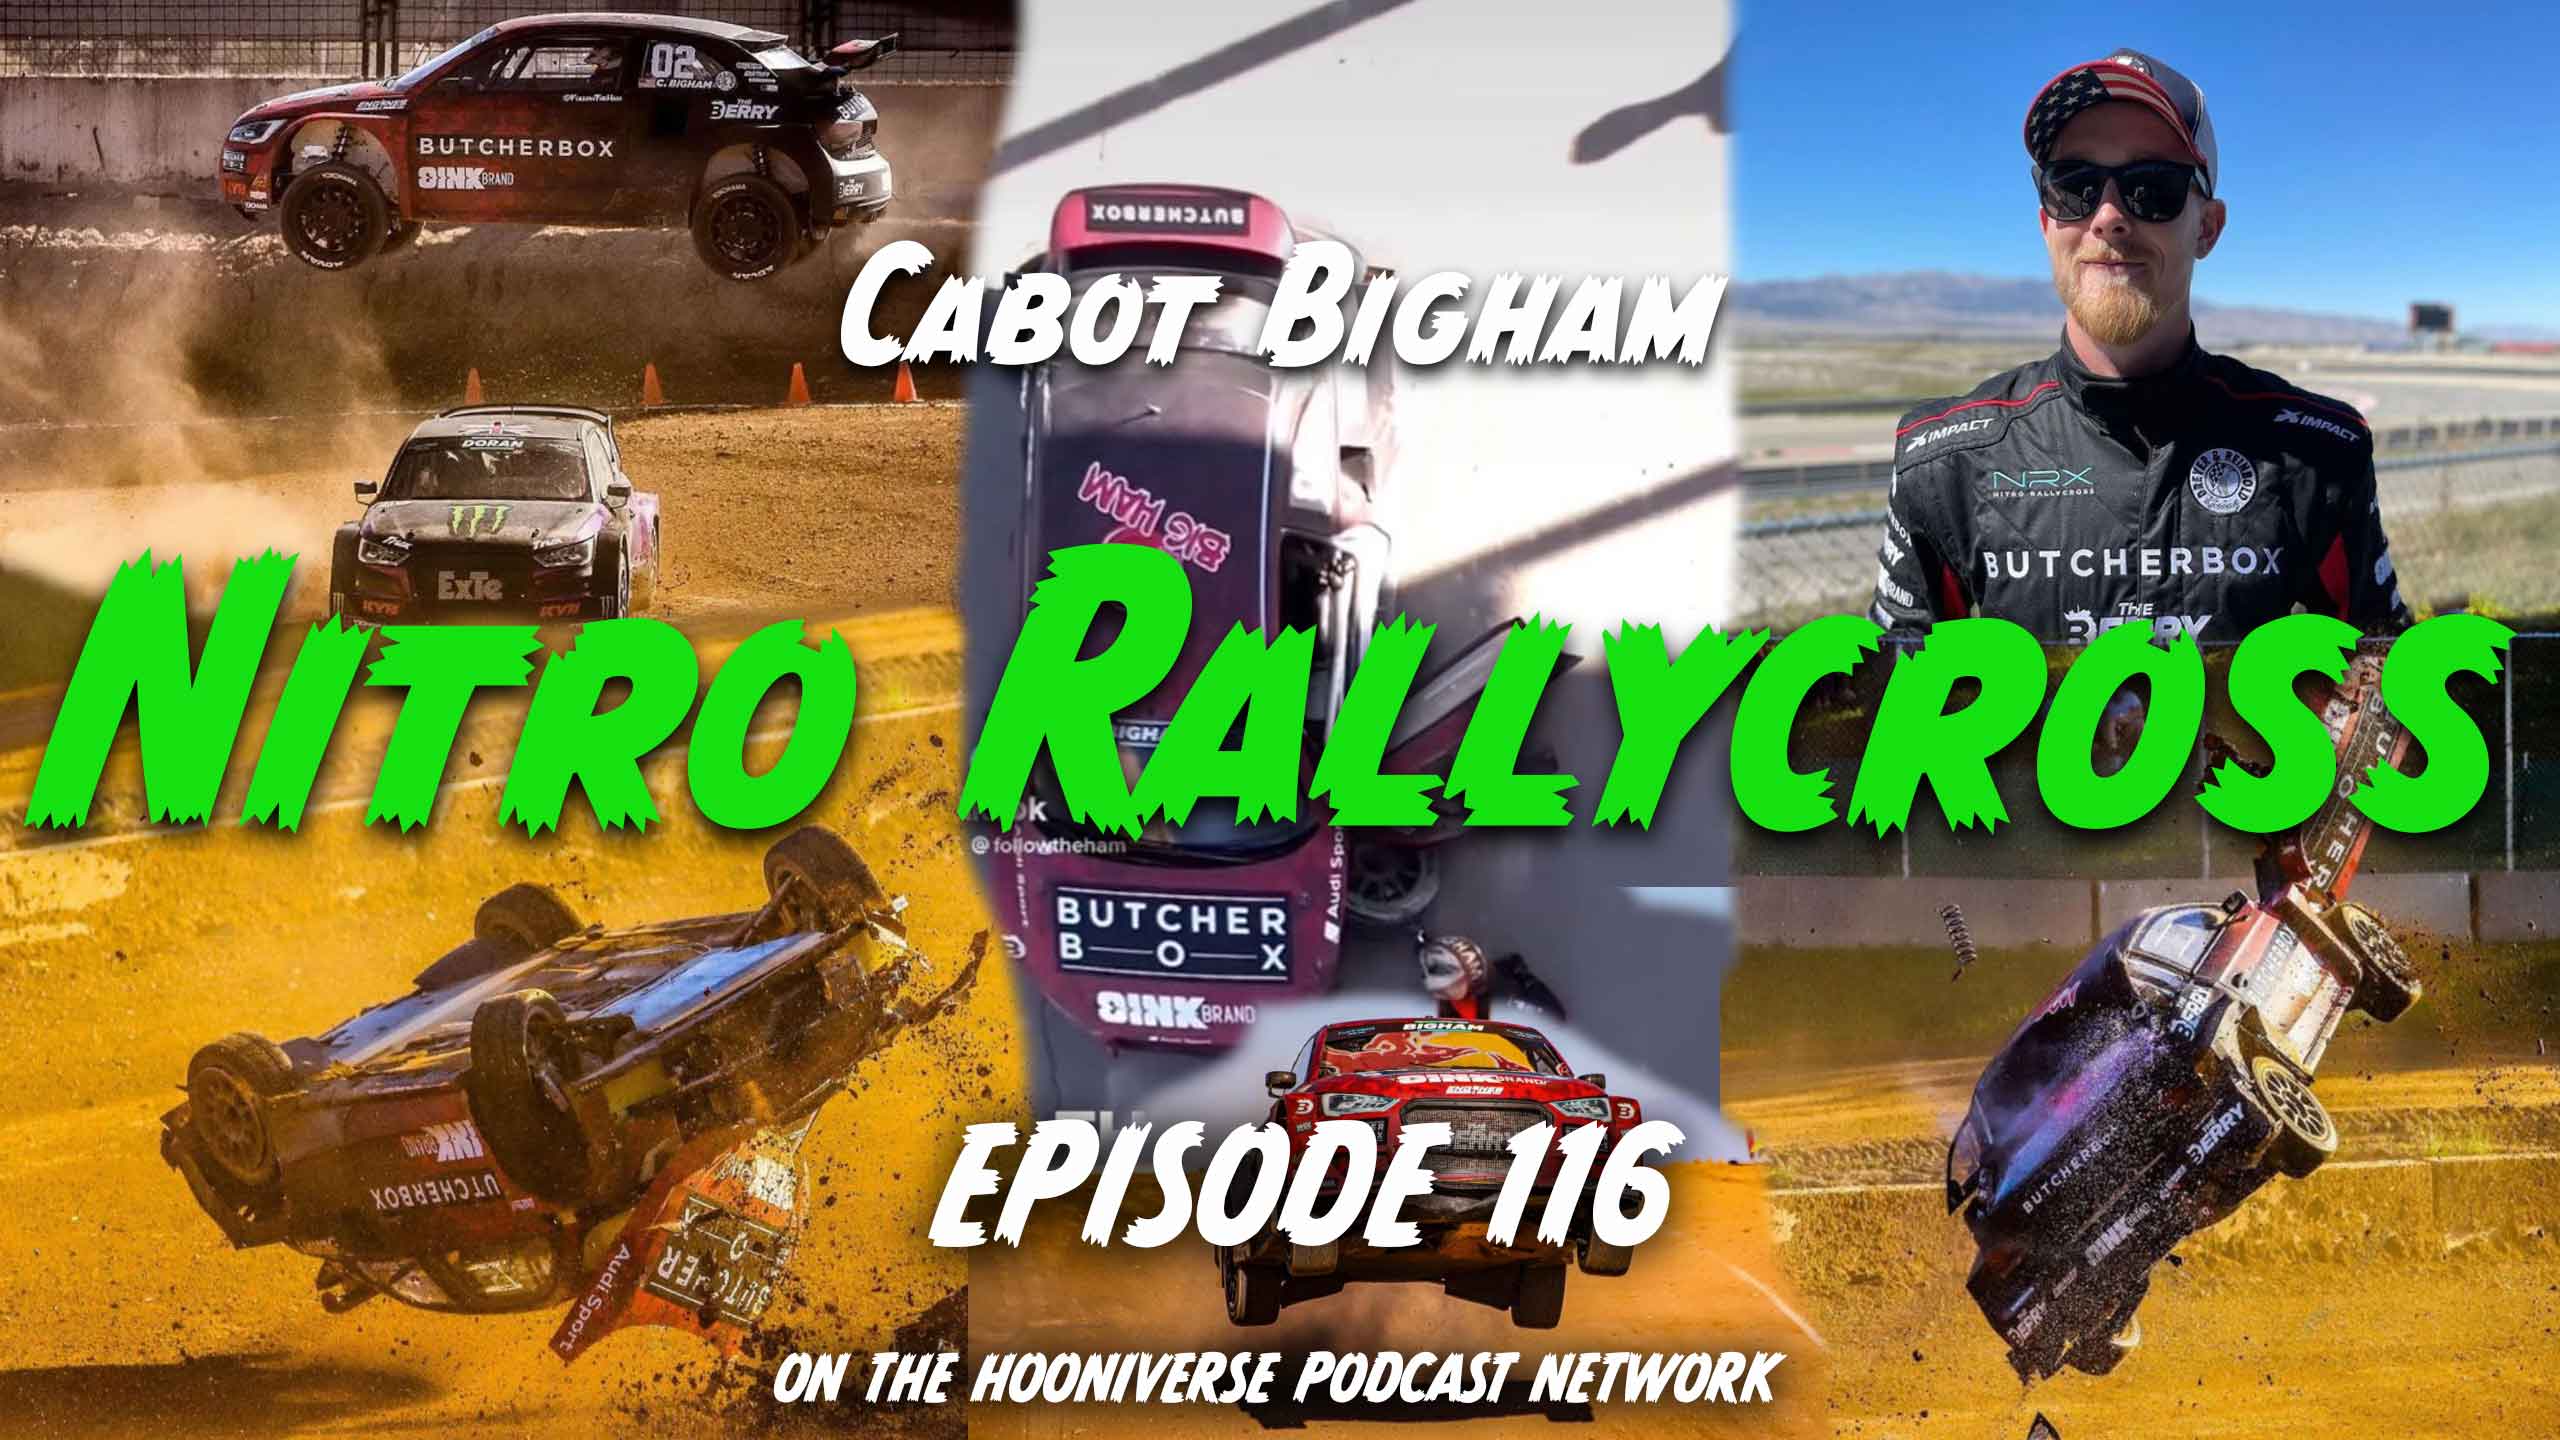 Cabot-Bigham-Nitro-Rallycross-Off-The-Road-Again-Podcast-Episode-116